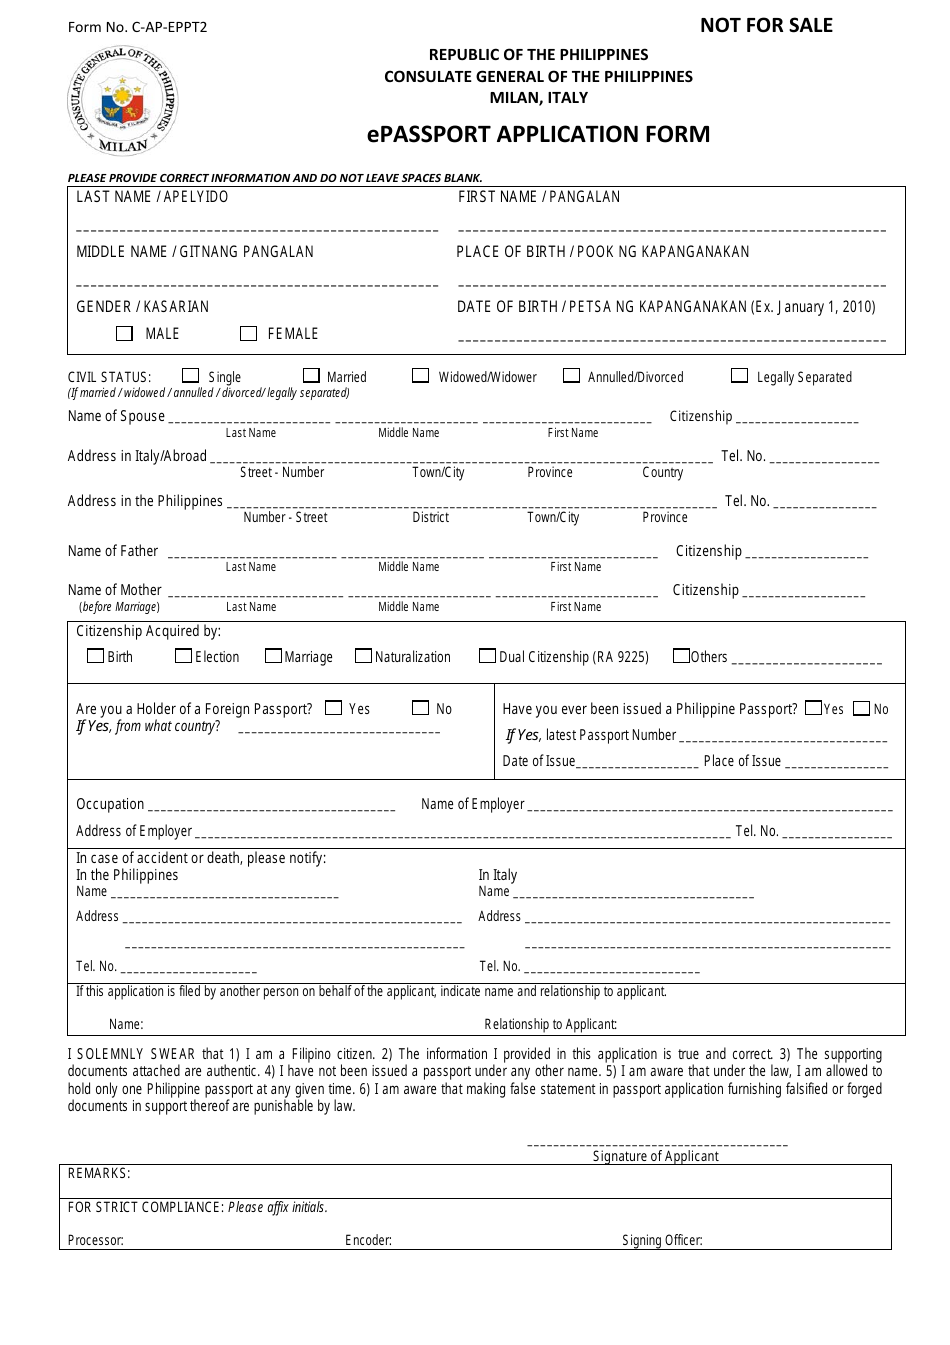 Epassport Application Form - Consulate General of the Philippines - Milan, Italy, Page 1